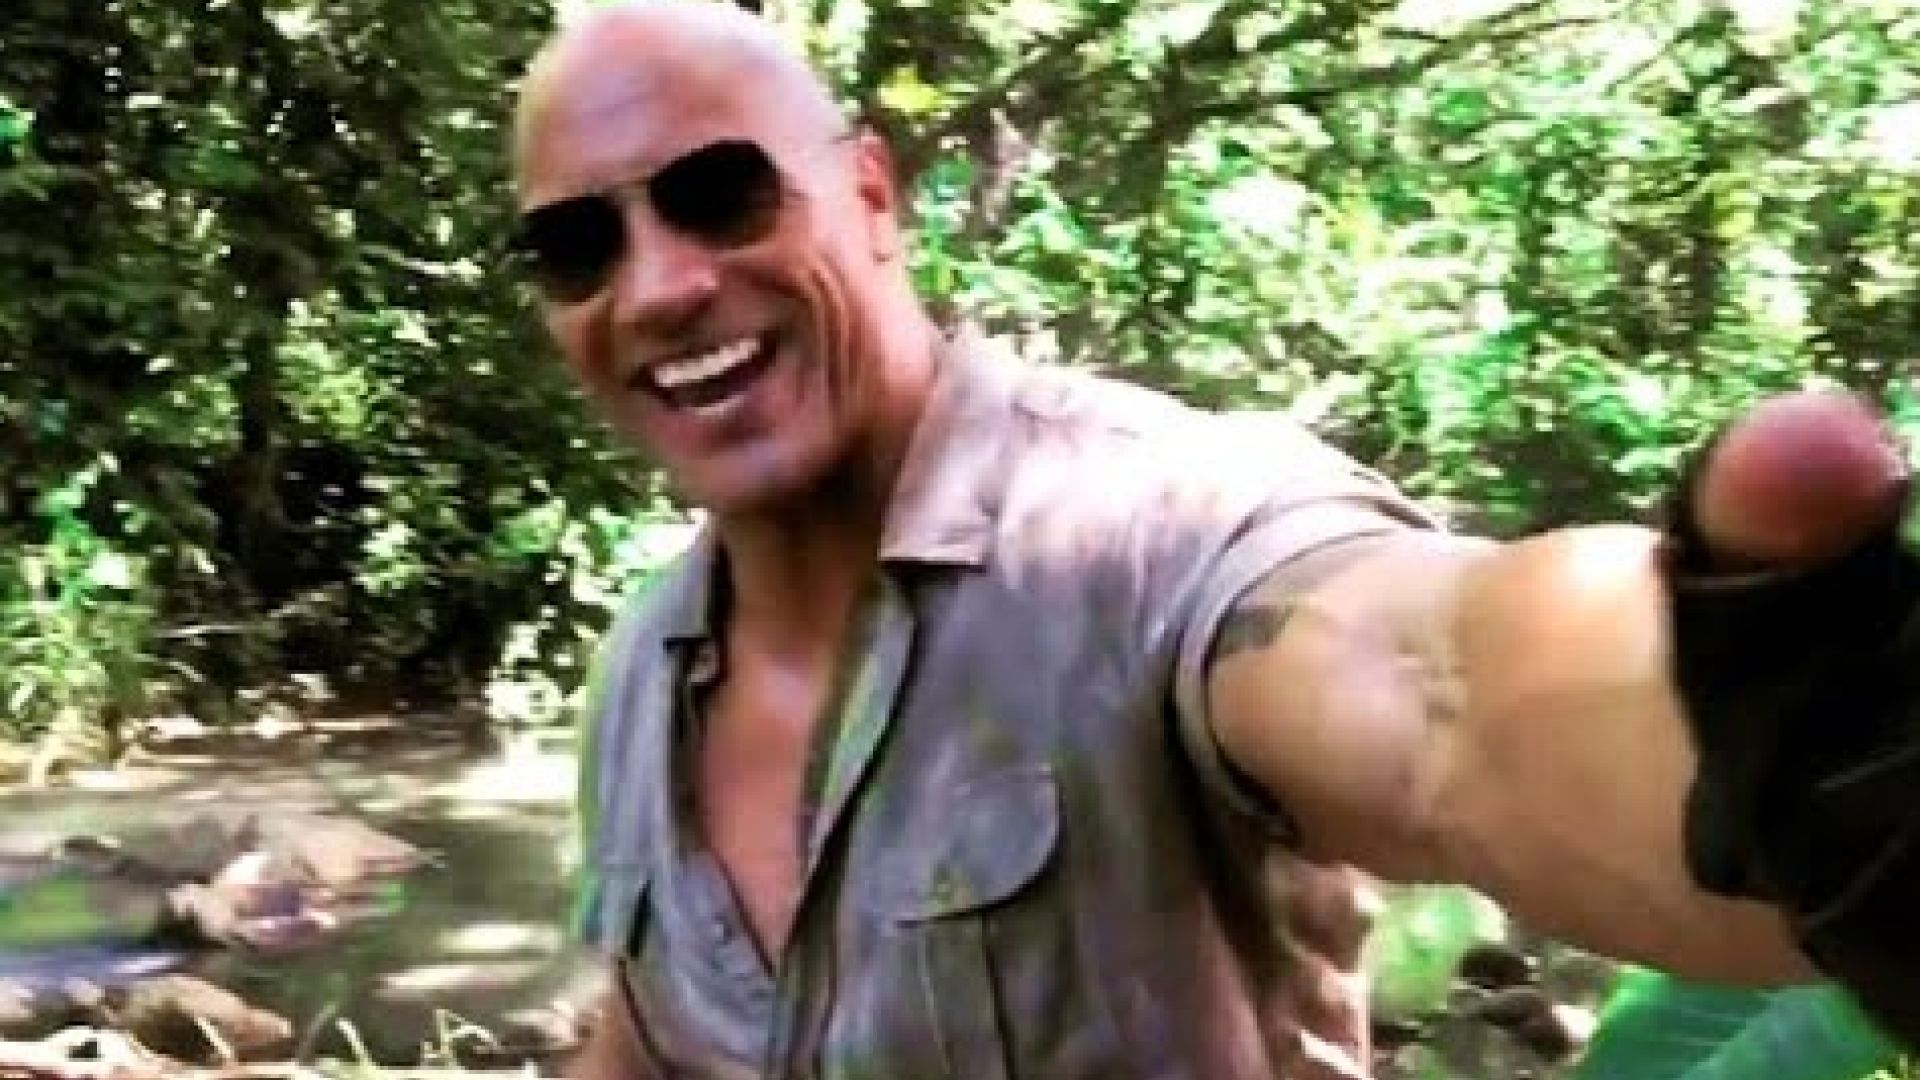 From the set of Jumanji, Dwayne Johnson plays a not-so-funny